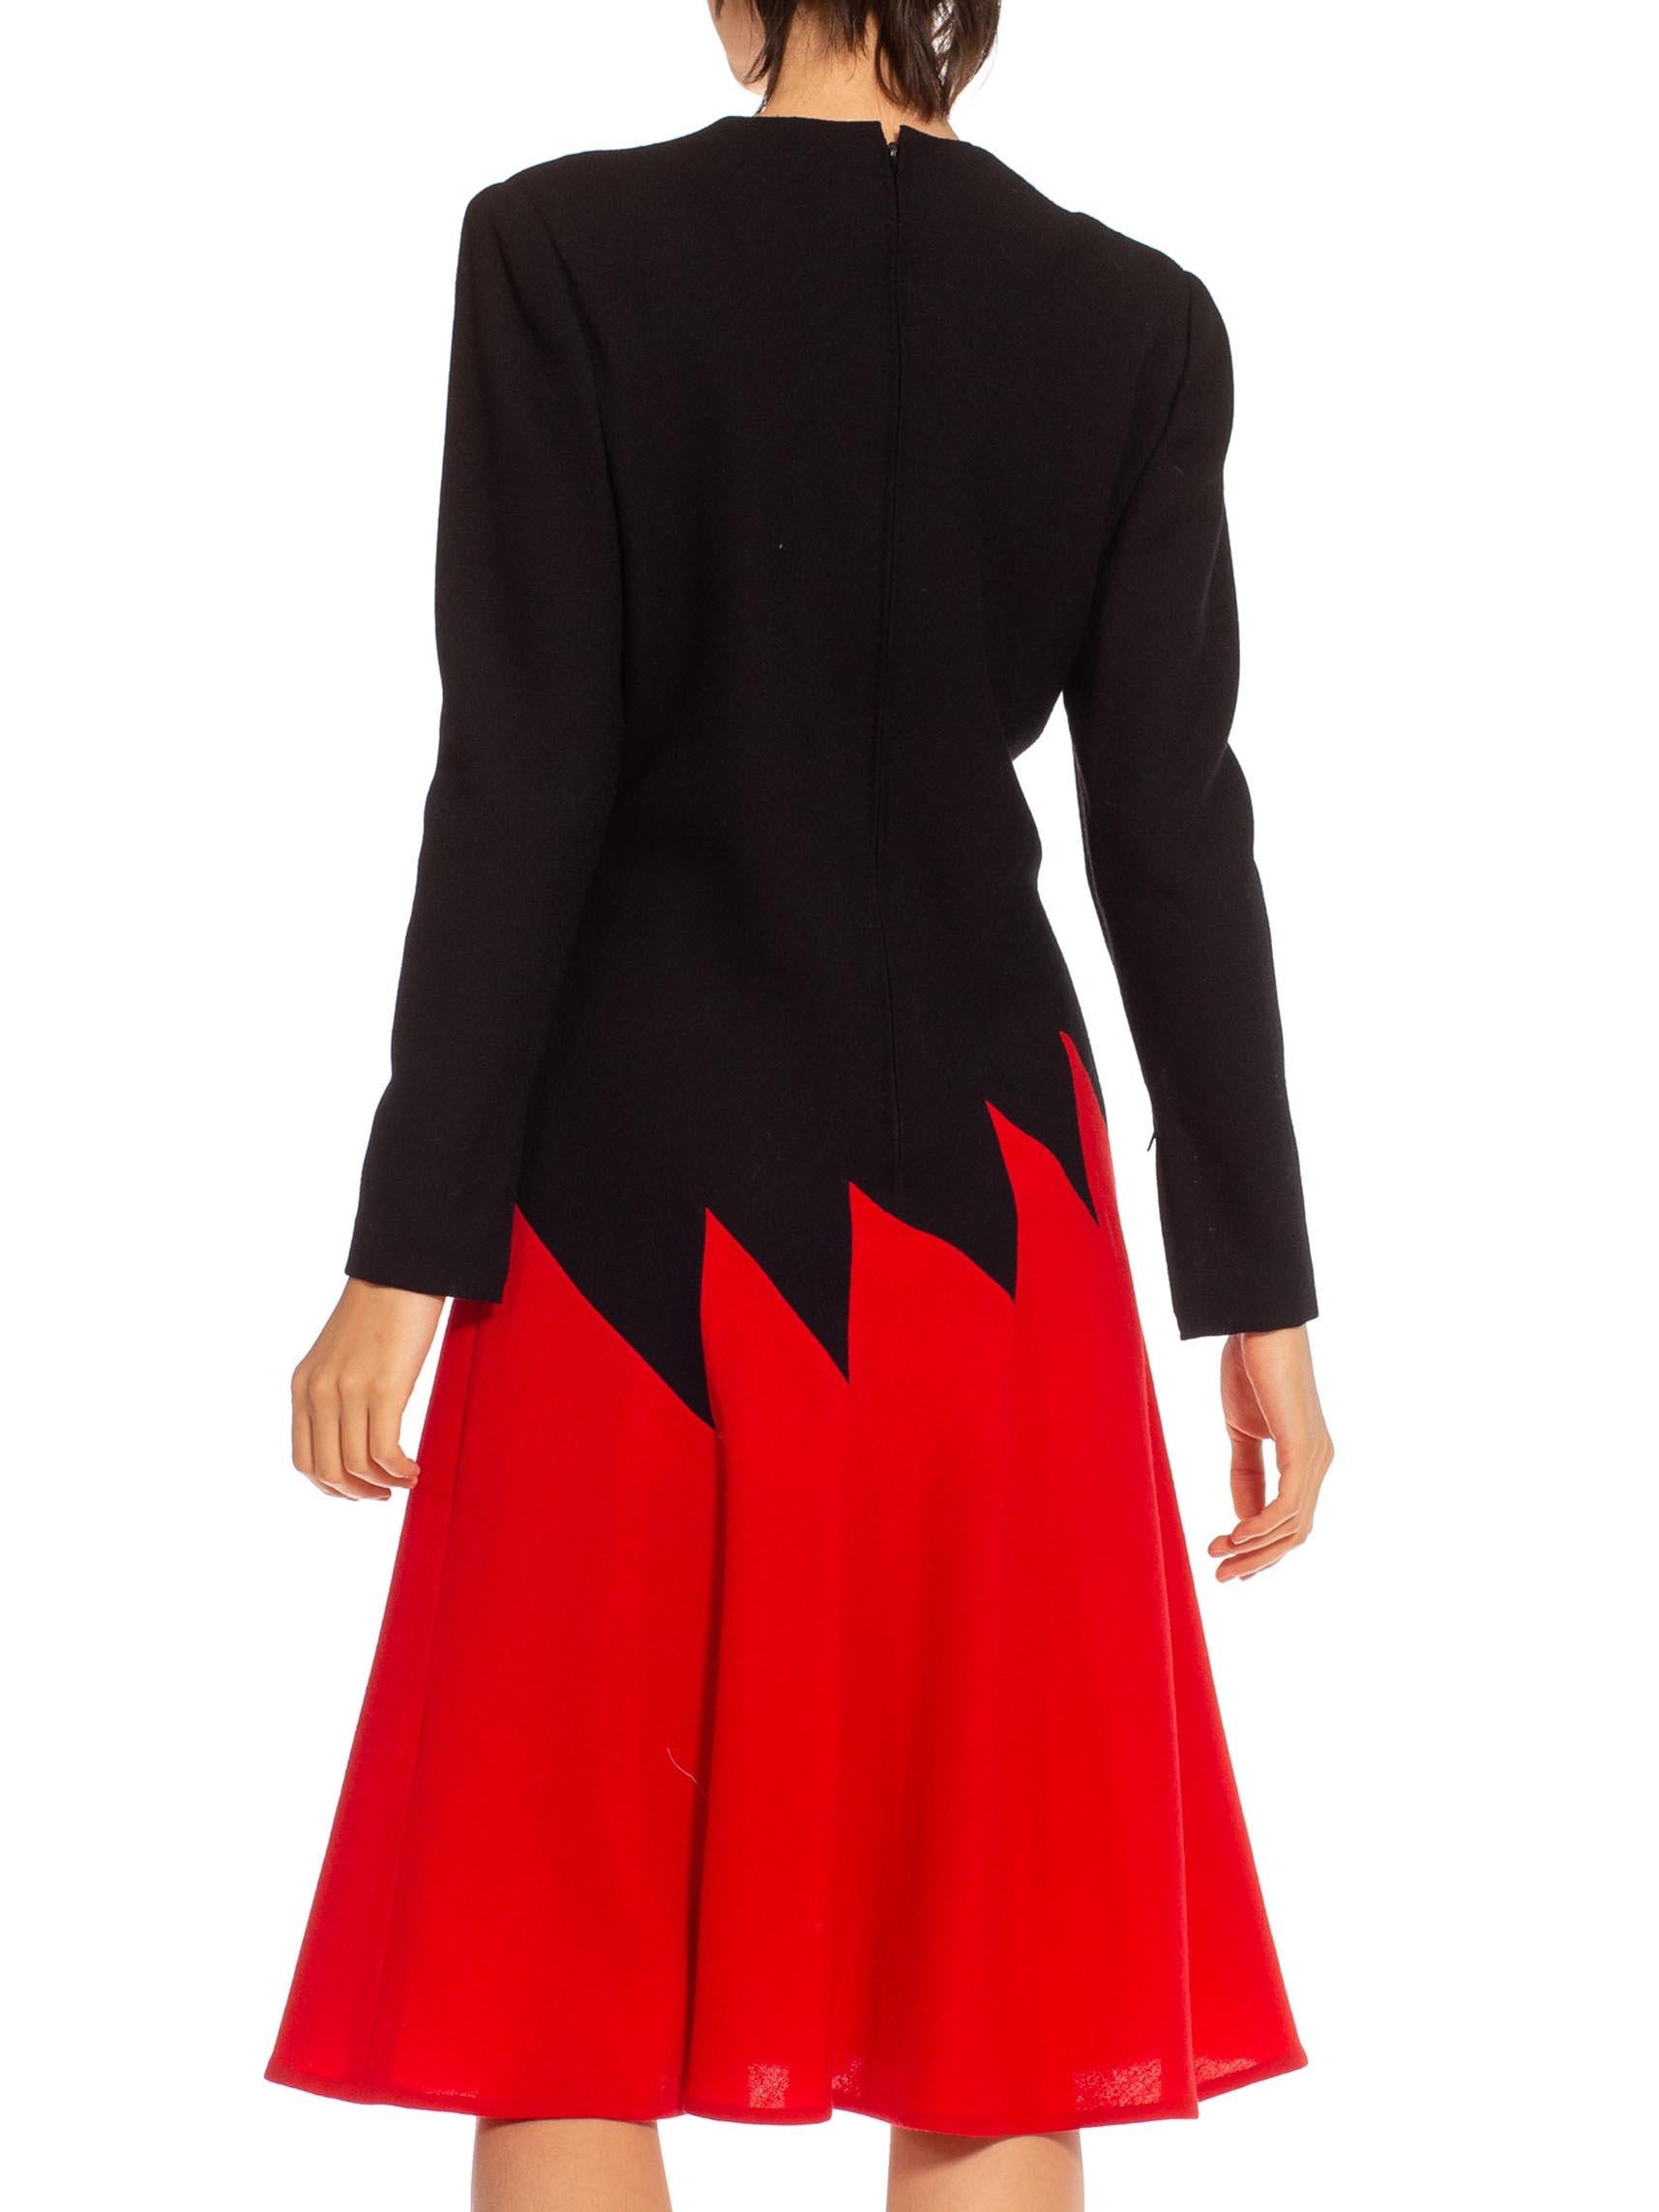 1980S Galanos Red & Black Long Sleeved Dress In Excellent Condition For Sale In New York, NY